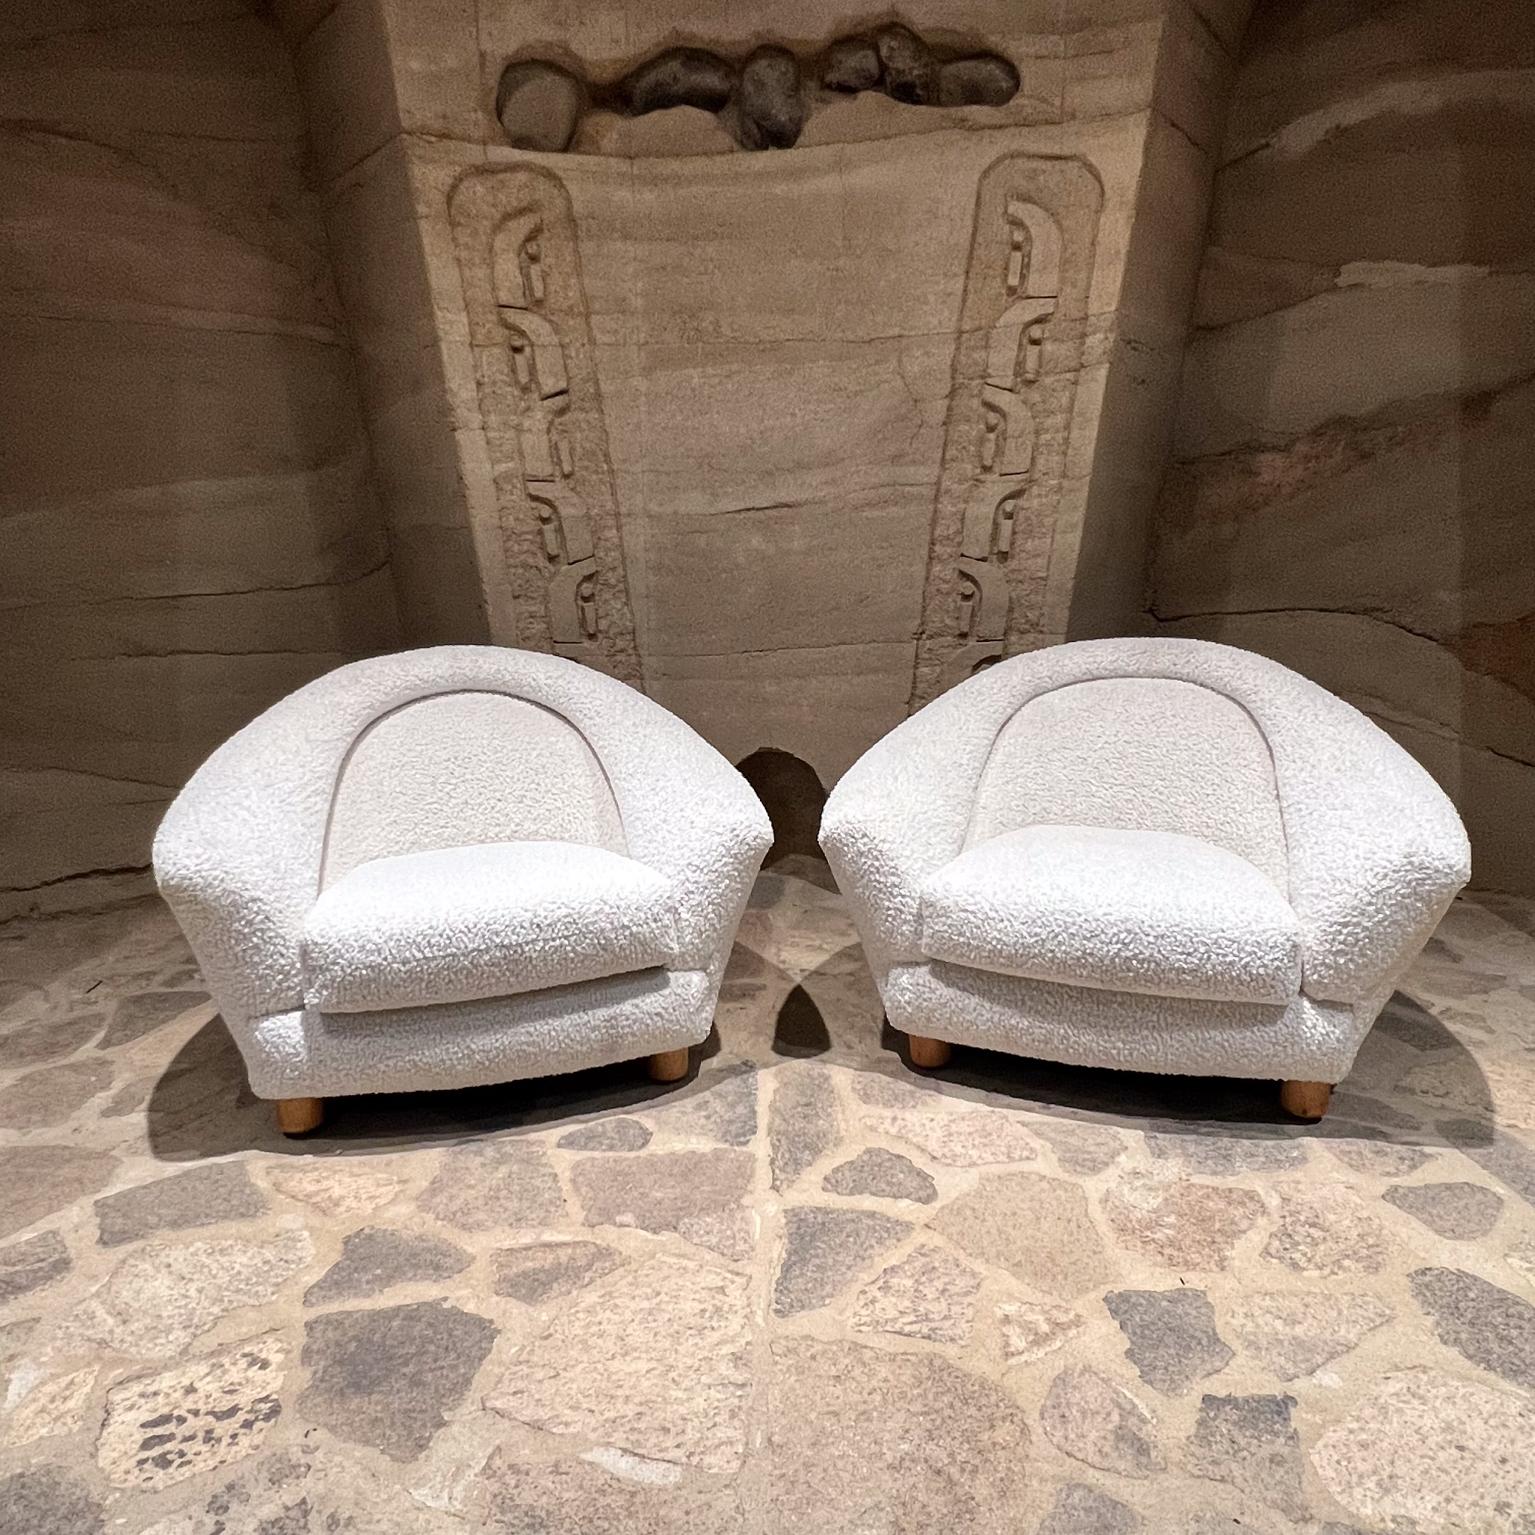 1970s fabulous French Style plush Ivory Lounge Chairs 
style polar bear 
Inspired by iconic designs of Jean Royère 1960s
28 h x 41 w x 32 d seat 15
New upholstery textured cozy woven fabric
Original preowned vintage very good condition.
Please